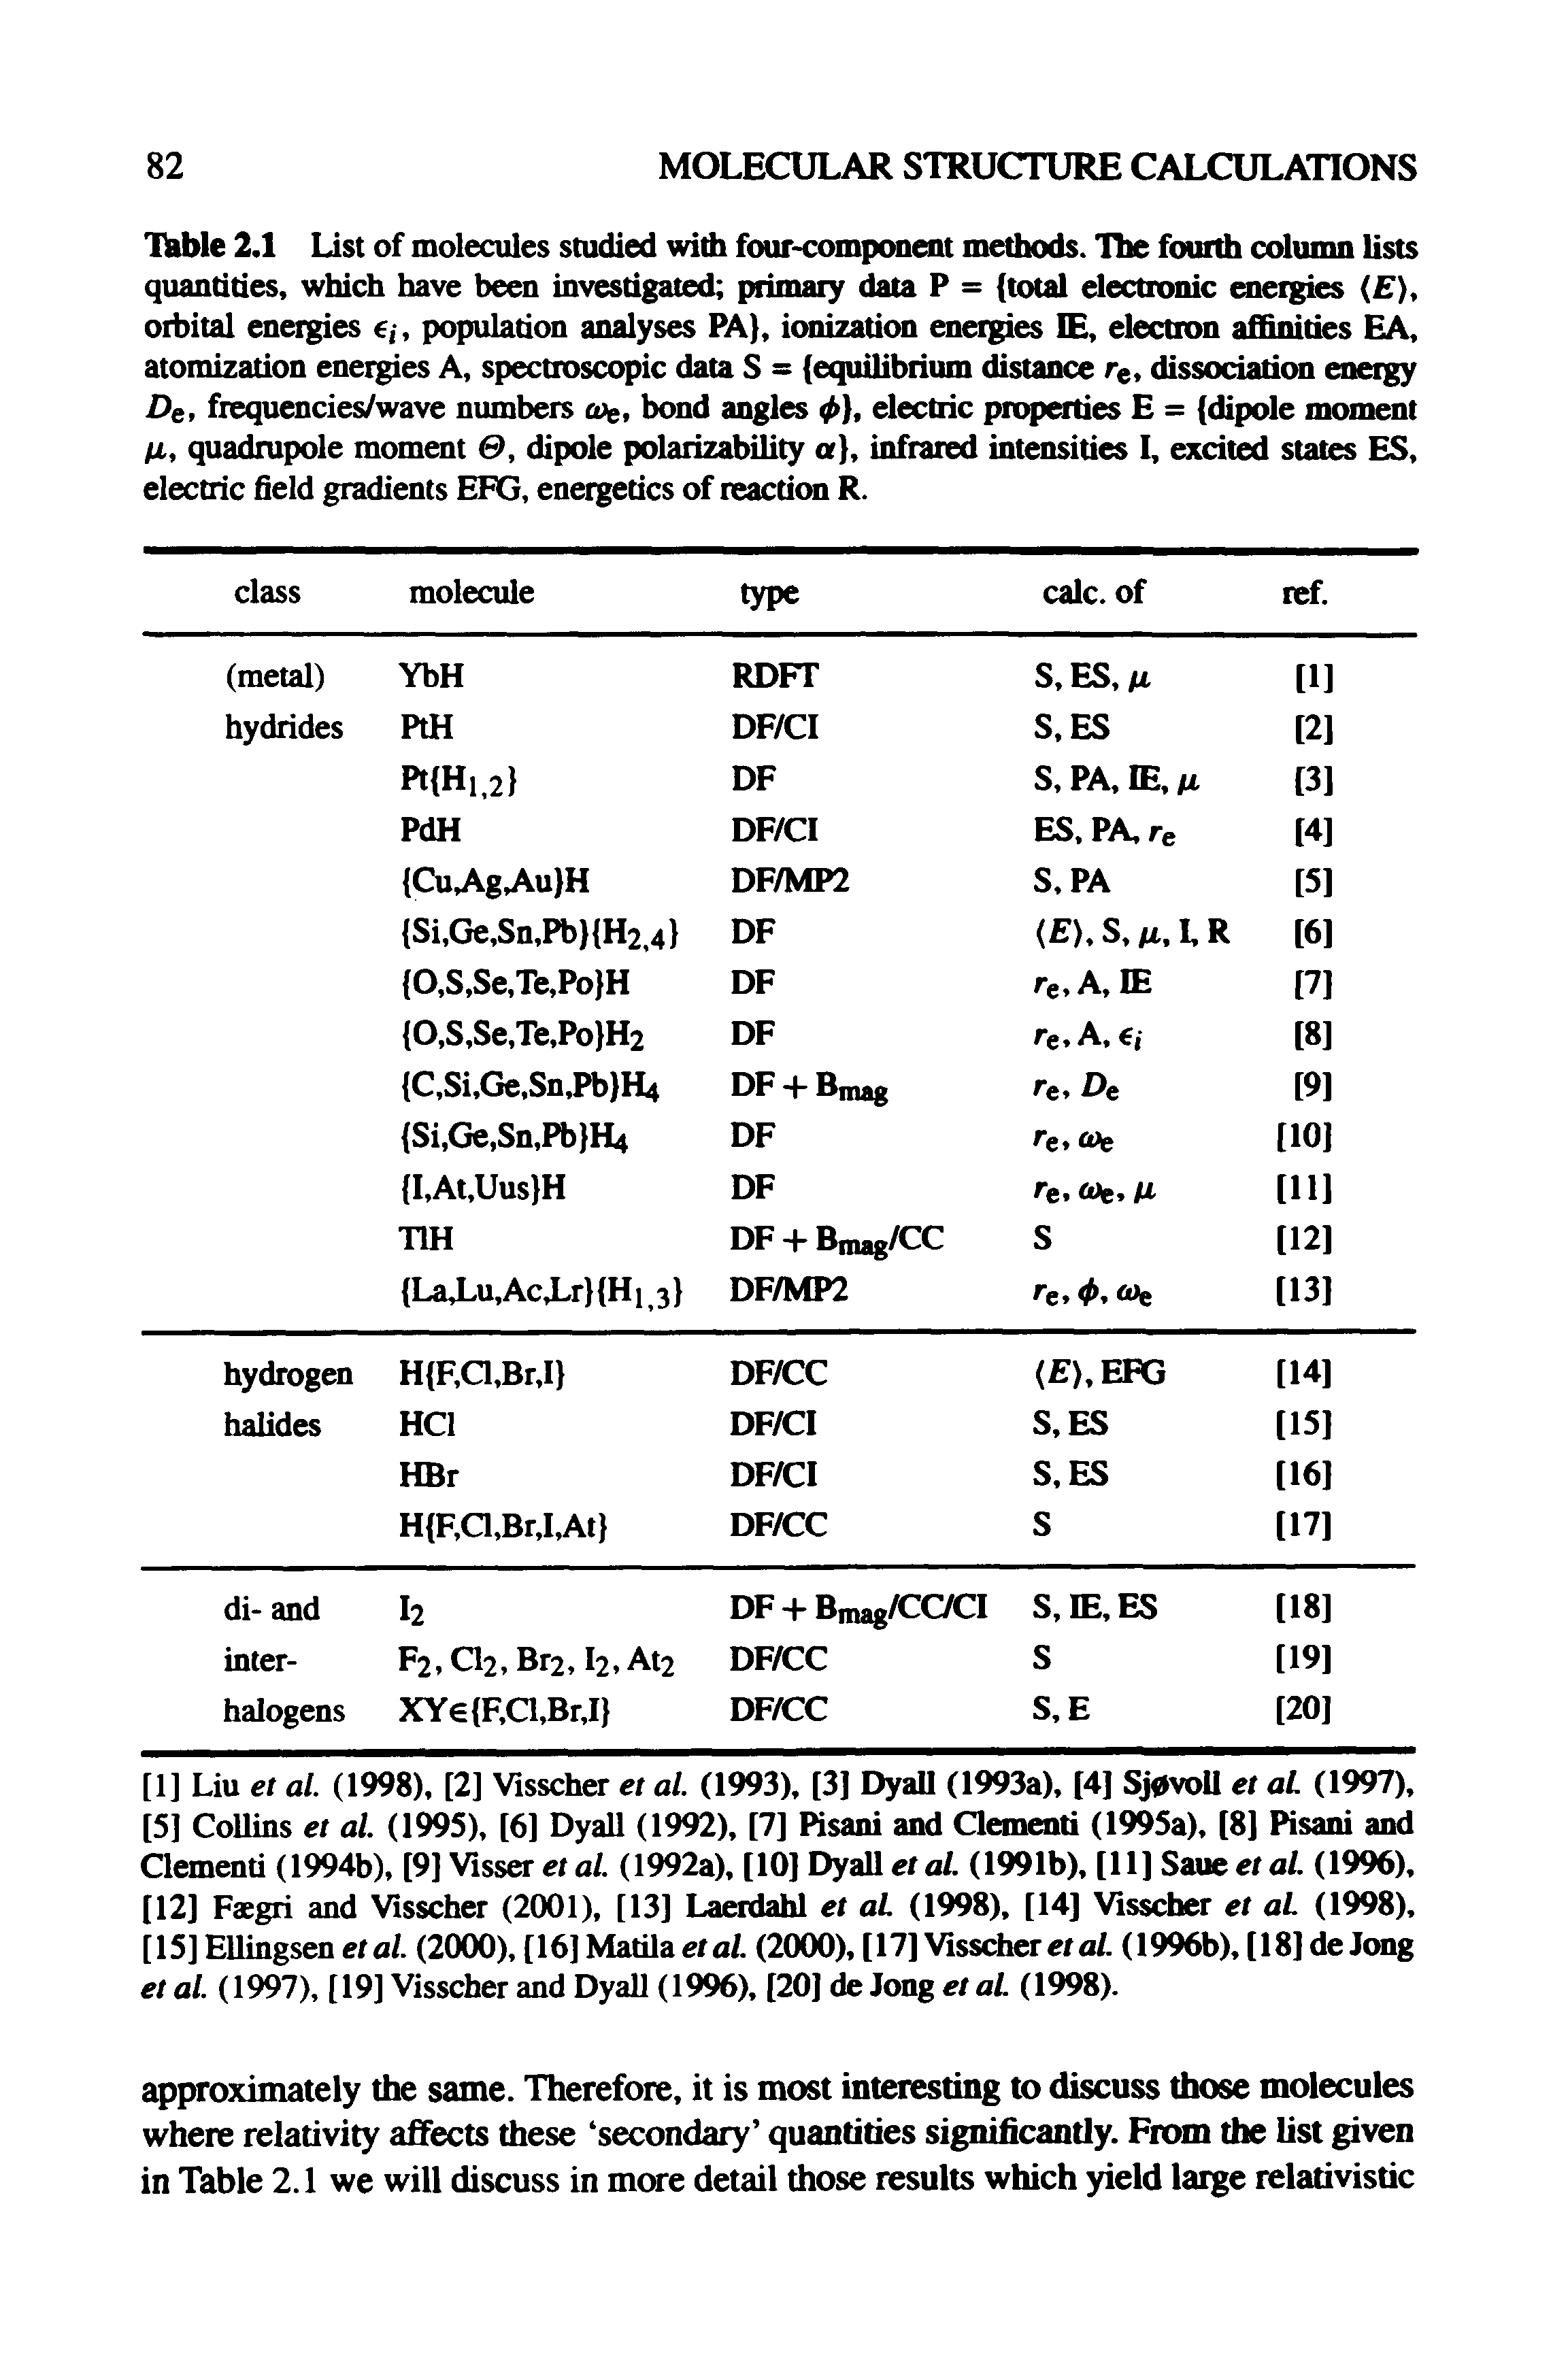 Table 2.1 List of molecules studied with four-component methods. The fourth column lists quantities, which have been investigated primary data P = (total electronic energies (E), orbital energies e,-, population analyses PA), ionization energies IE, election affinities EA, atomization energies A, spectroscopic data S = (equilibrium distance re, dissociation energy De, frequencies/wave numbers coe, bond angles 0), electric properties E = (dipole moment fx, quadrupole moment 0, dipole polarizability a, infrared intensities I, excited states ES, electric field gradients EFG, energetics of reaction R.